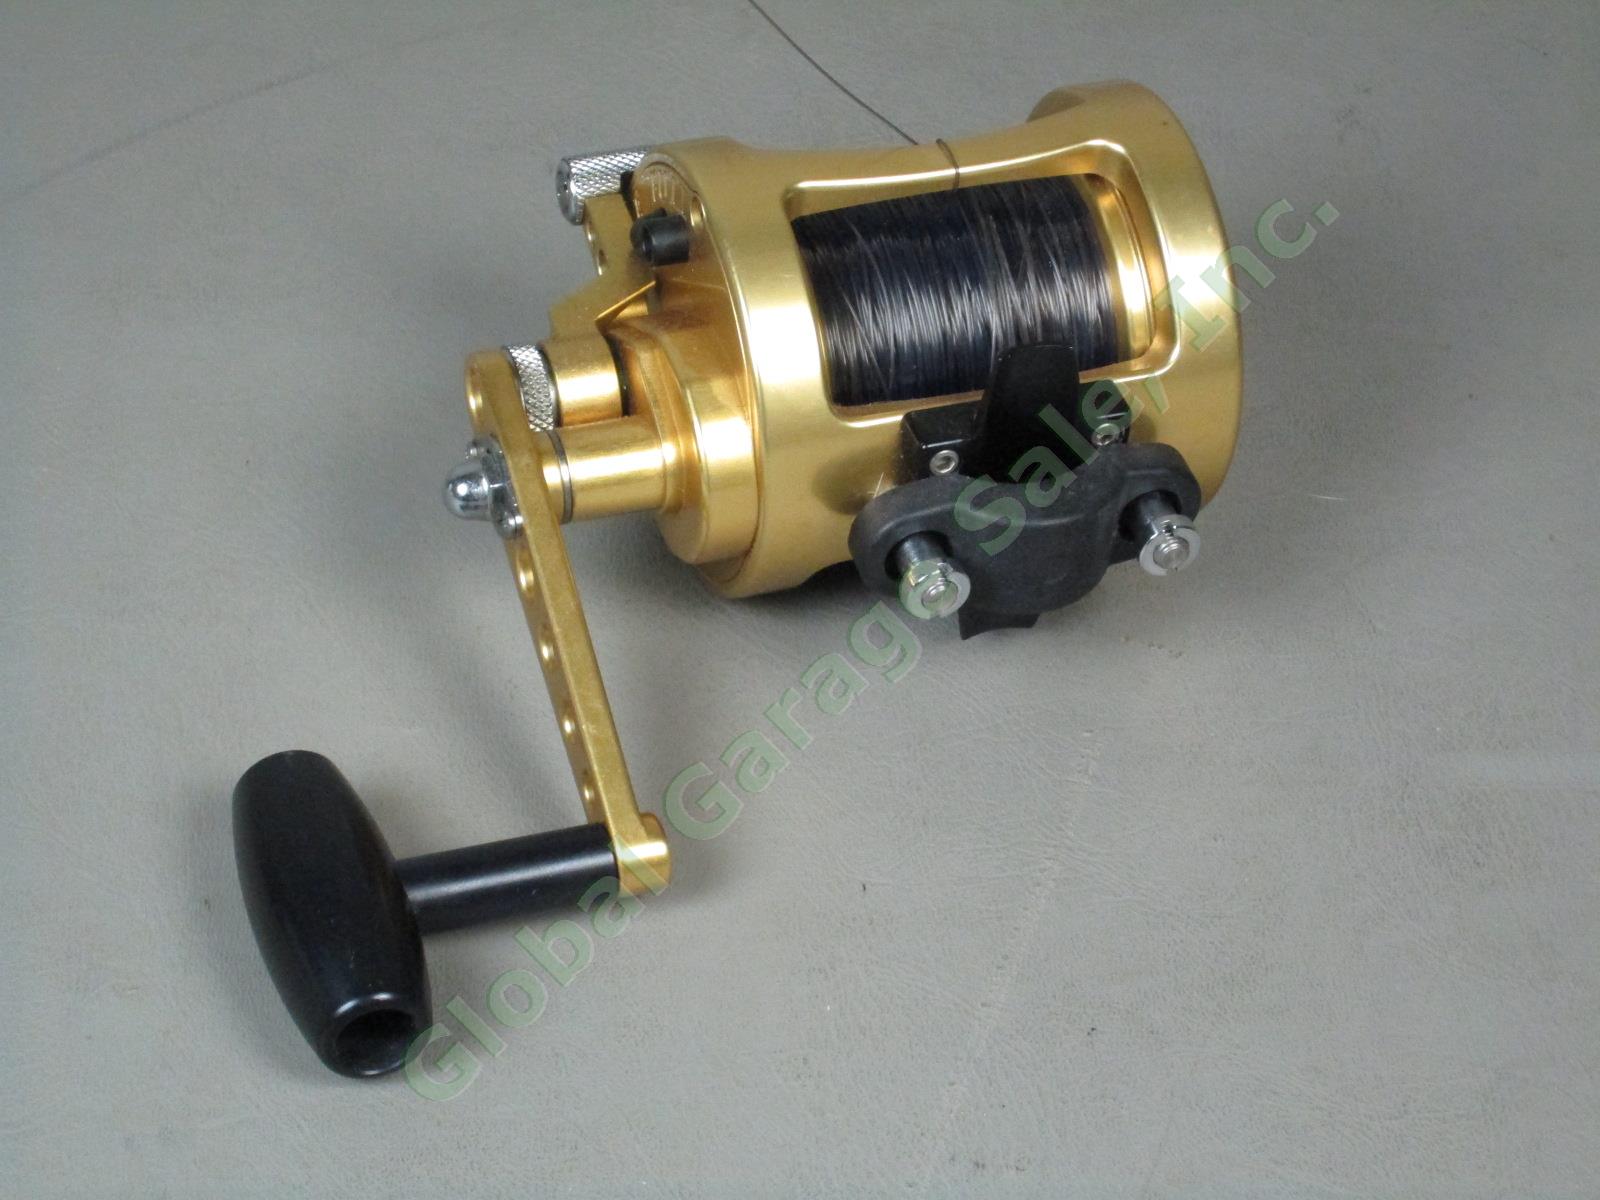 Avet LX 4.1.1 Lever Drag Gold Fishing Reel Stainless Bearings USA Made EXC+ Cond 1